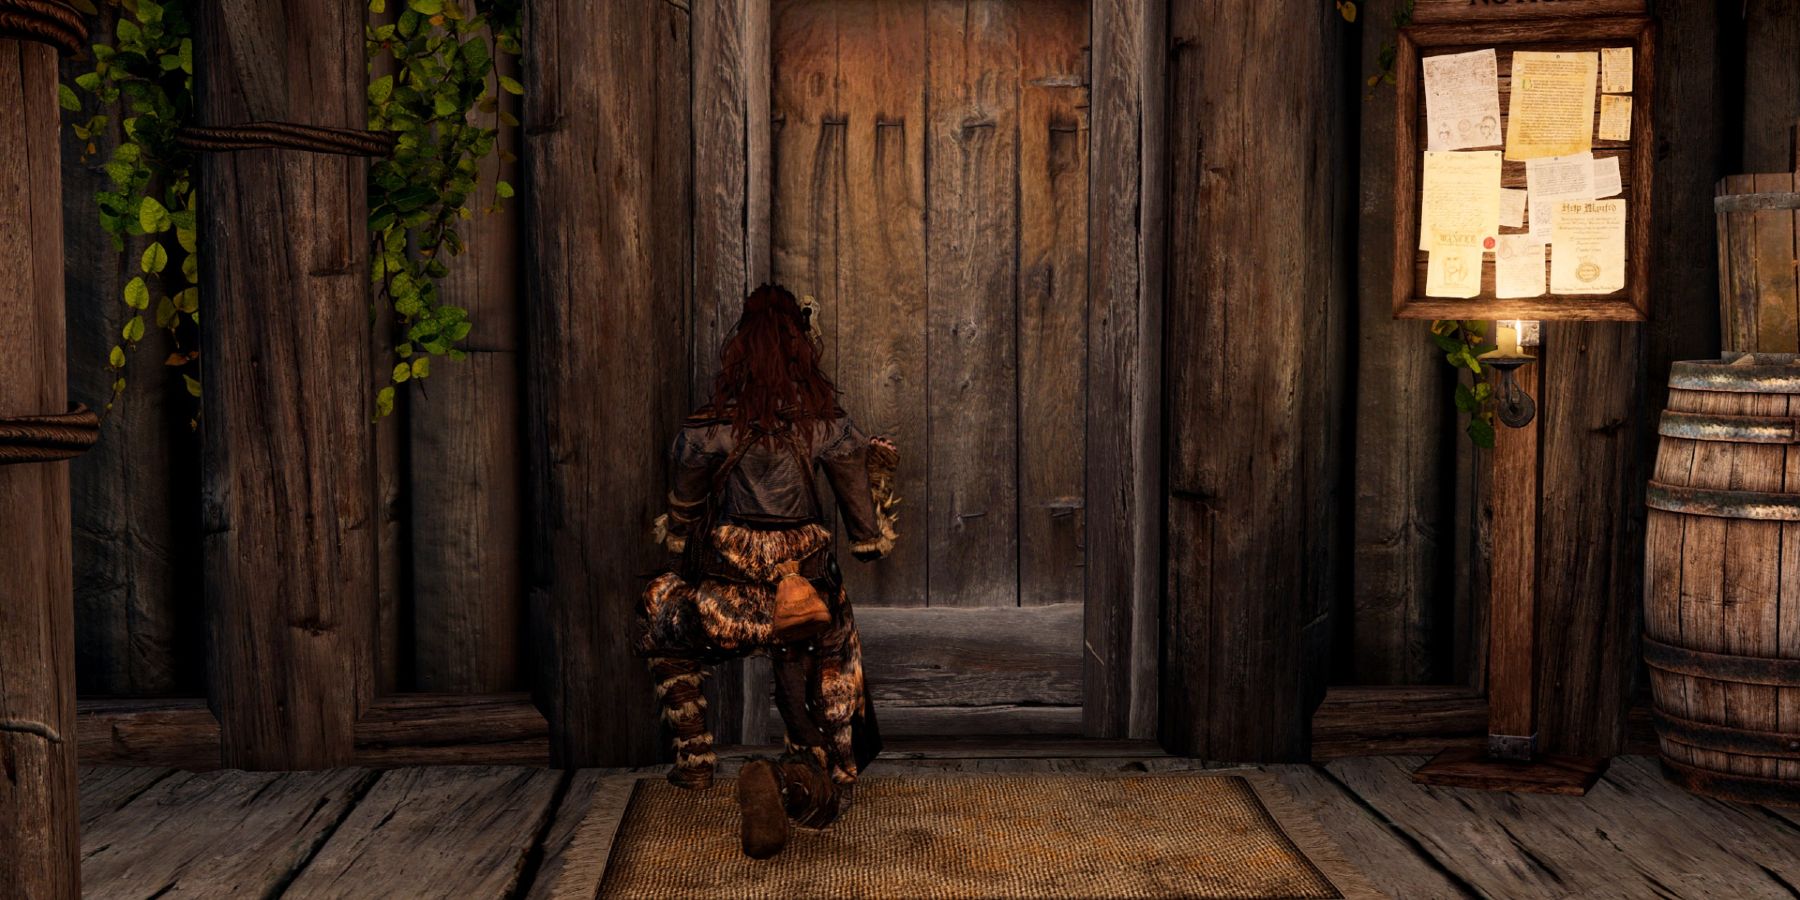 Image from The Elder Scrolls 5: Skyrim showing the player crouching in front of a door.